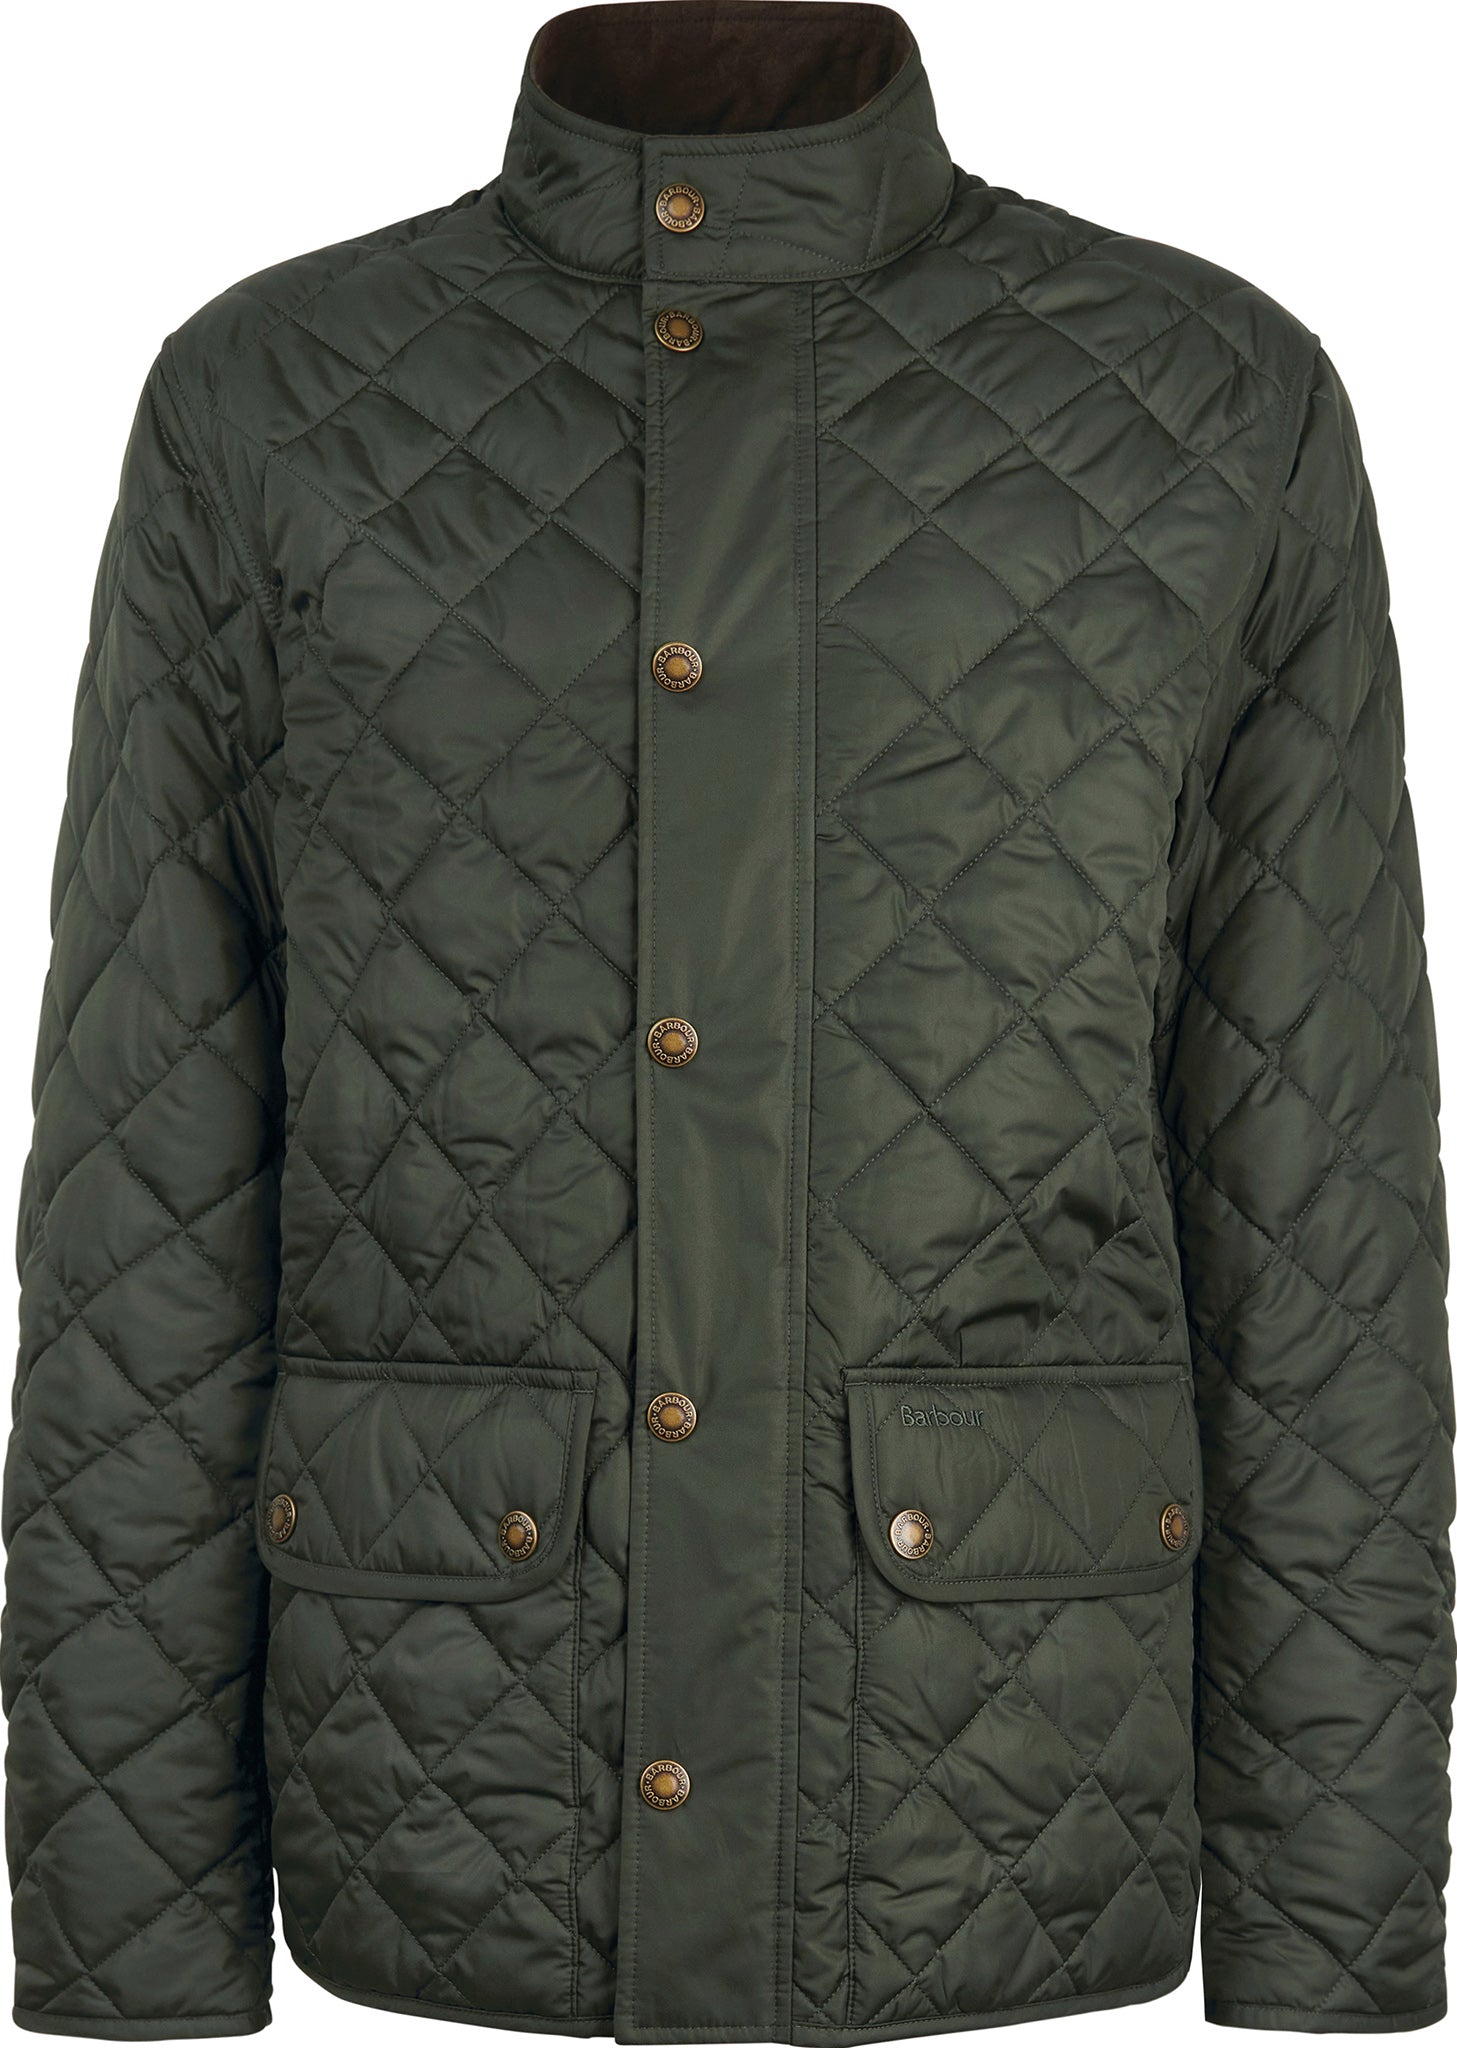 Barbour Lowerdale Quilted Jacket - Men's | Altitude Sports